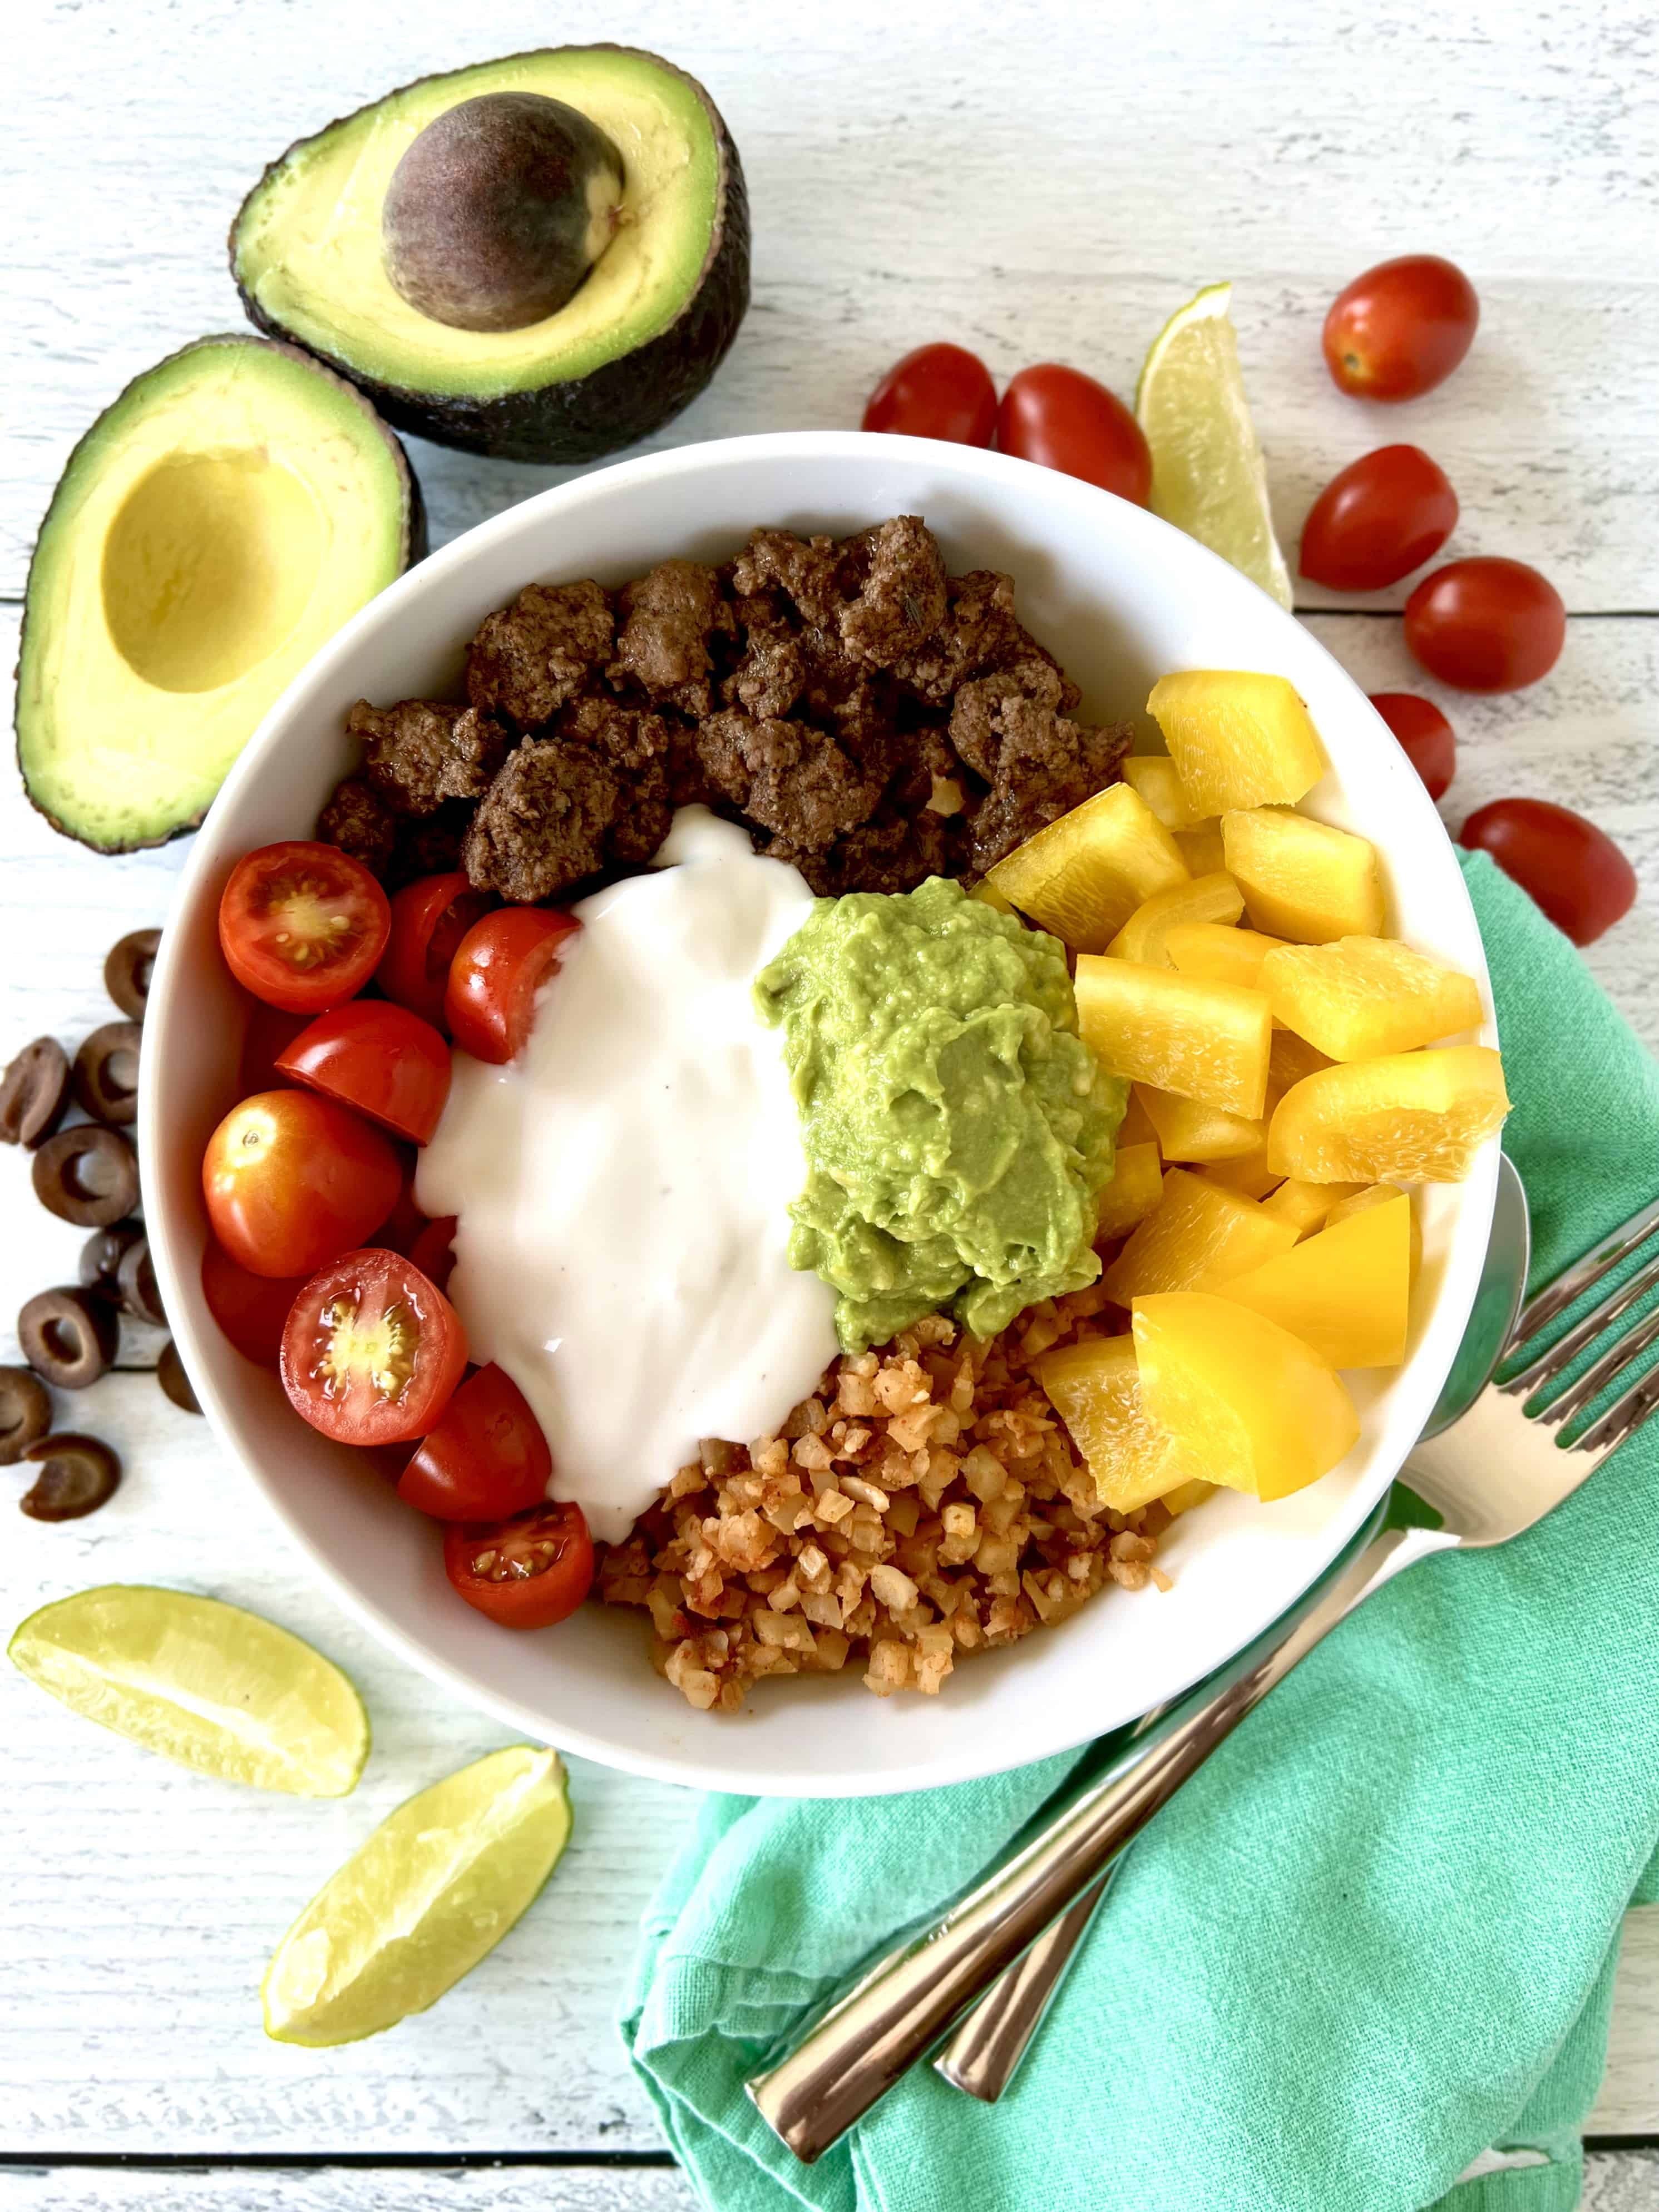 A low carb taco bowl on a white wooden table surrounded by lime wedges, avocado halves, cherry tomatoes and sliced black olives.